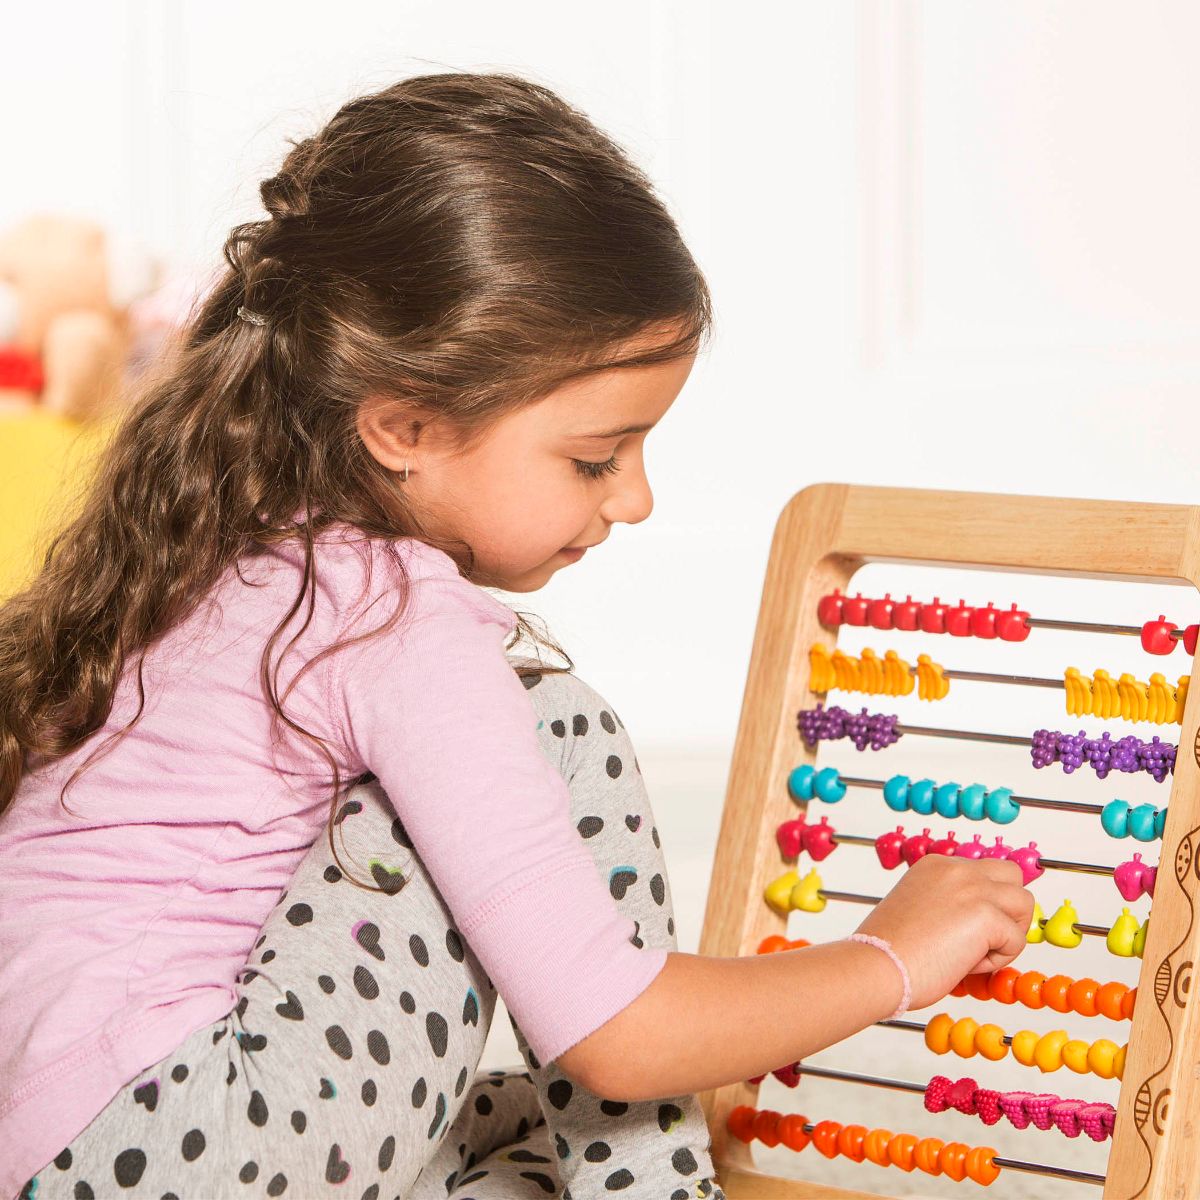 Fruit-themed wooden abacus.